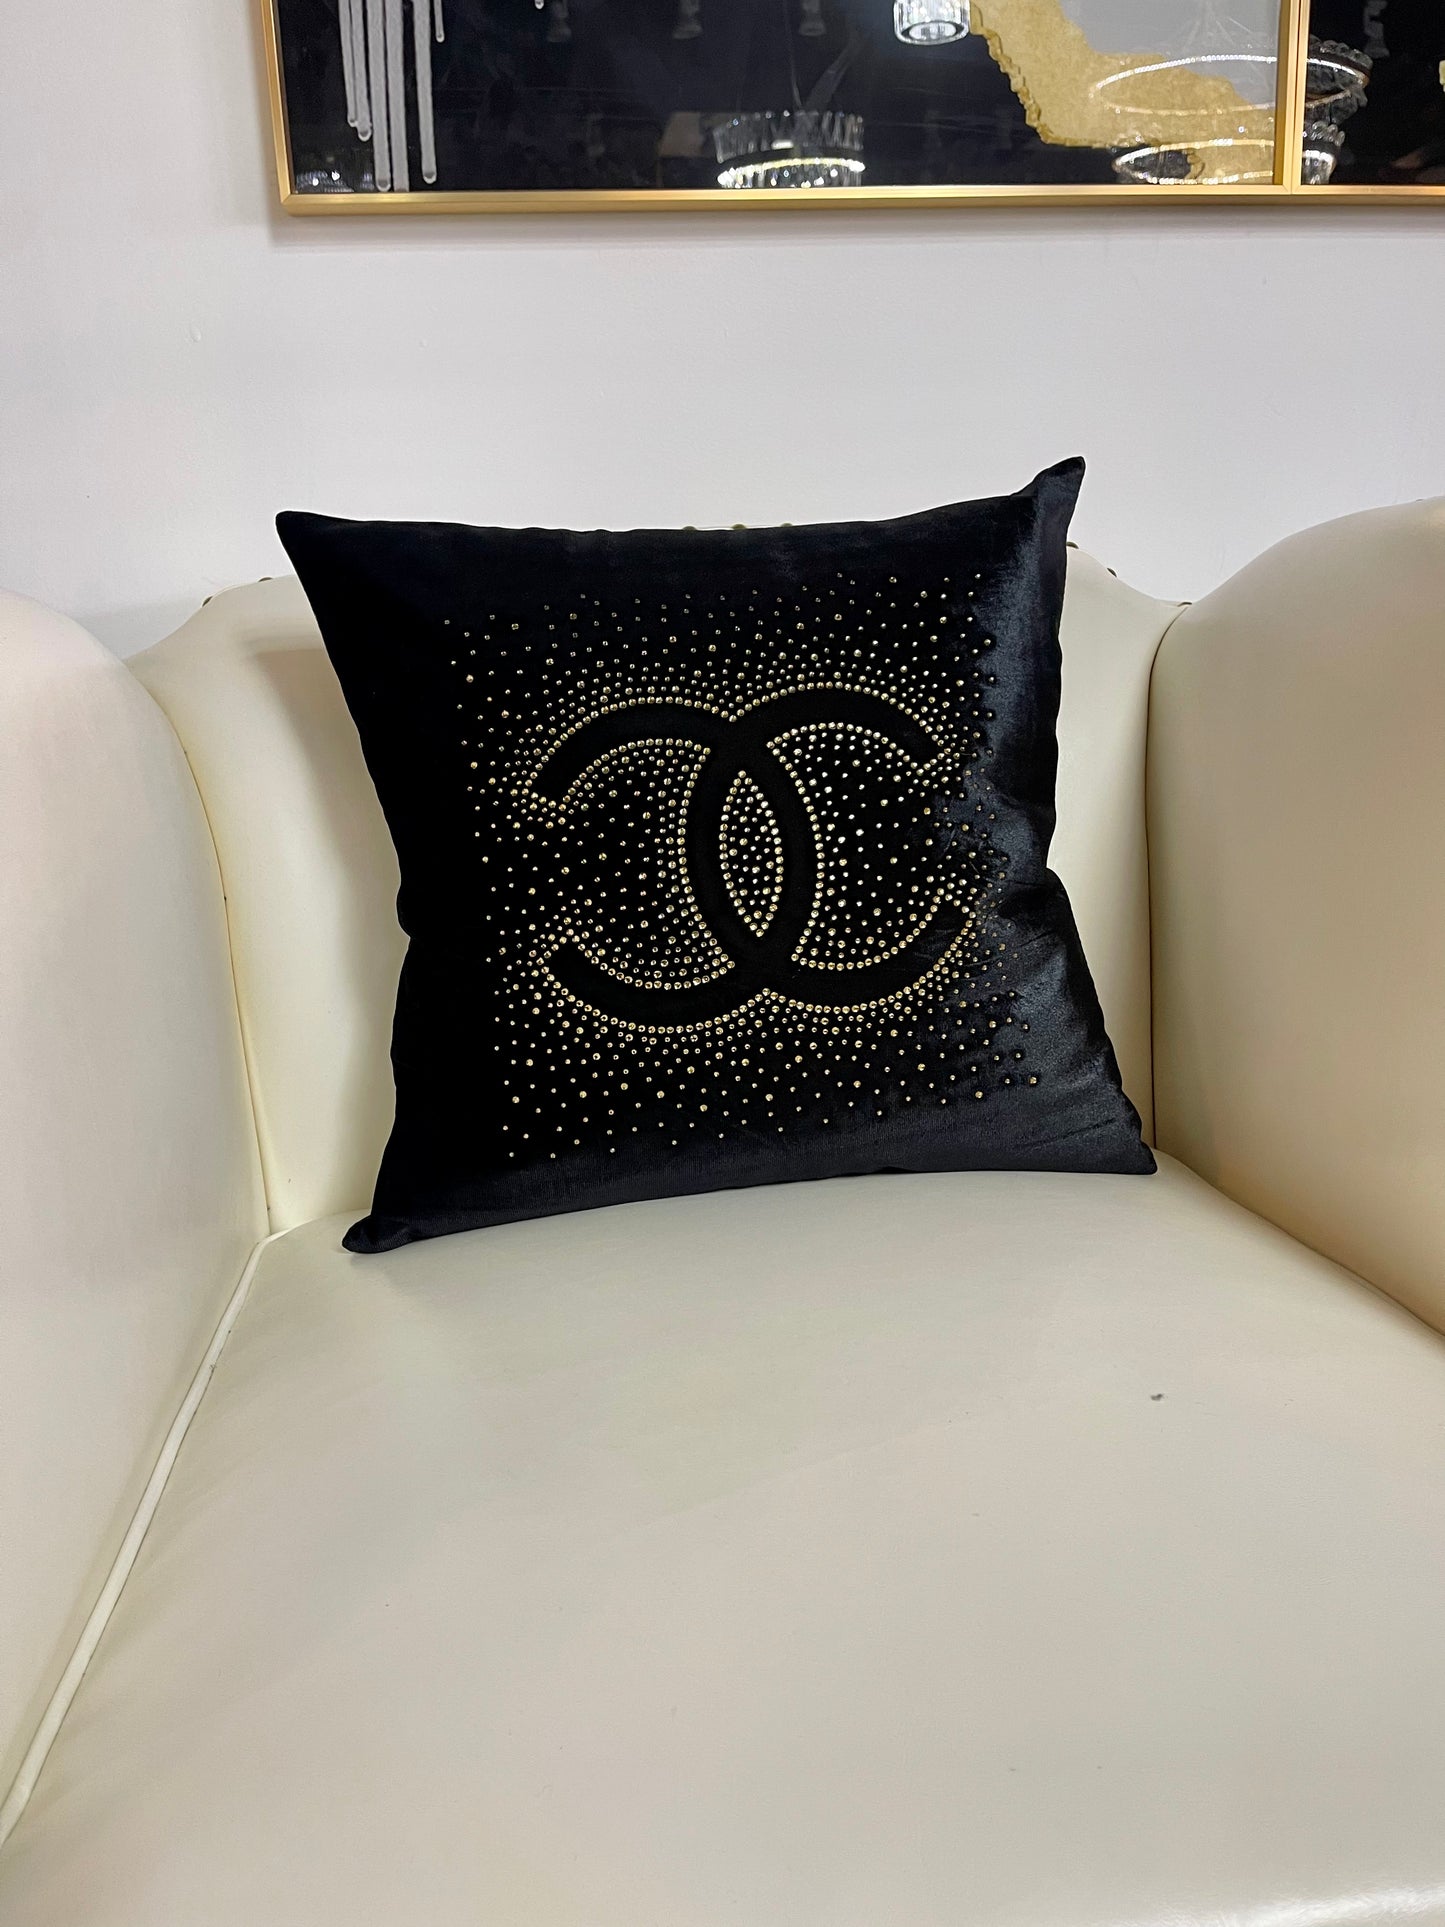 Keep Your Heels Head and Standards High - Chanel No 5 - Pillow